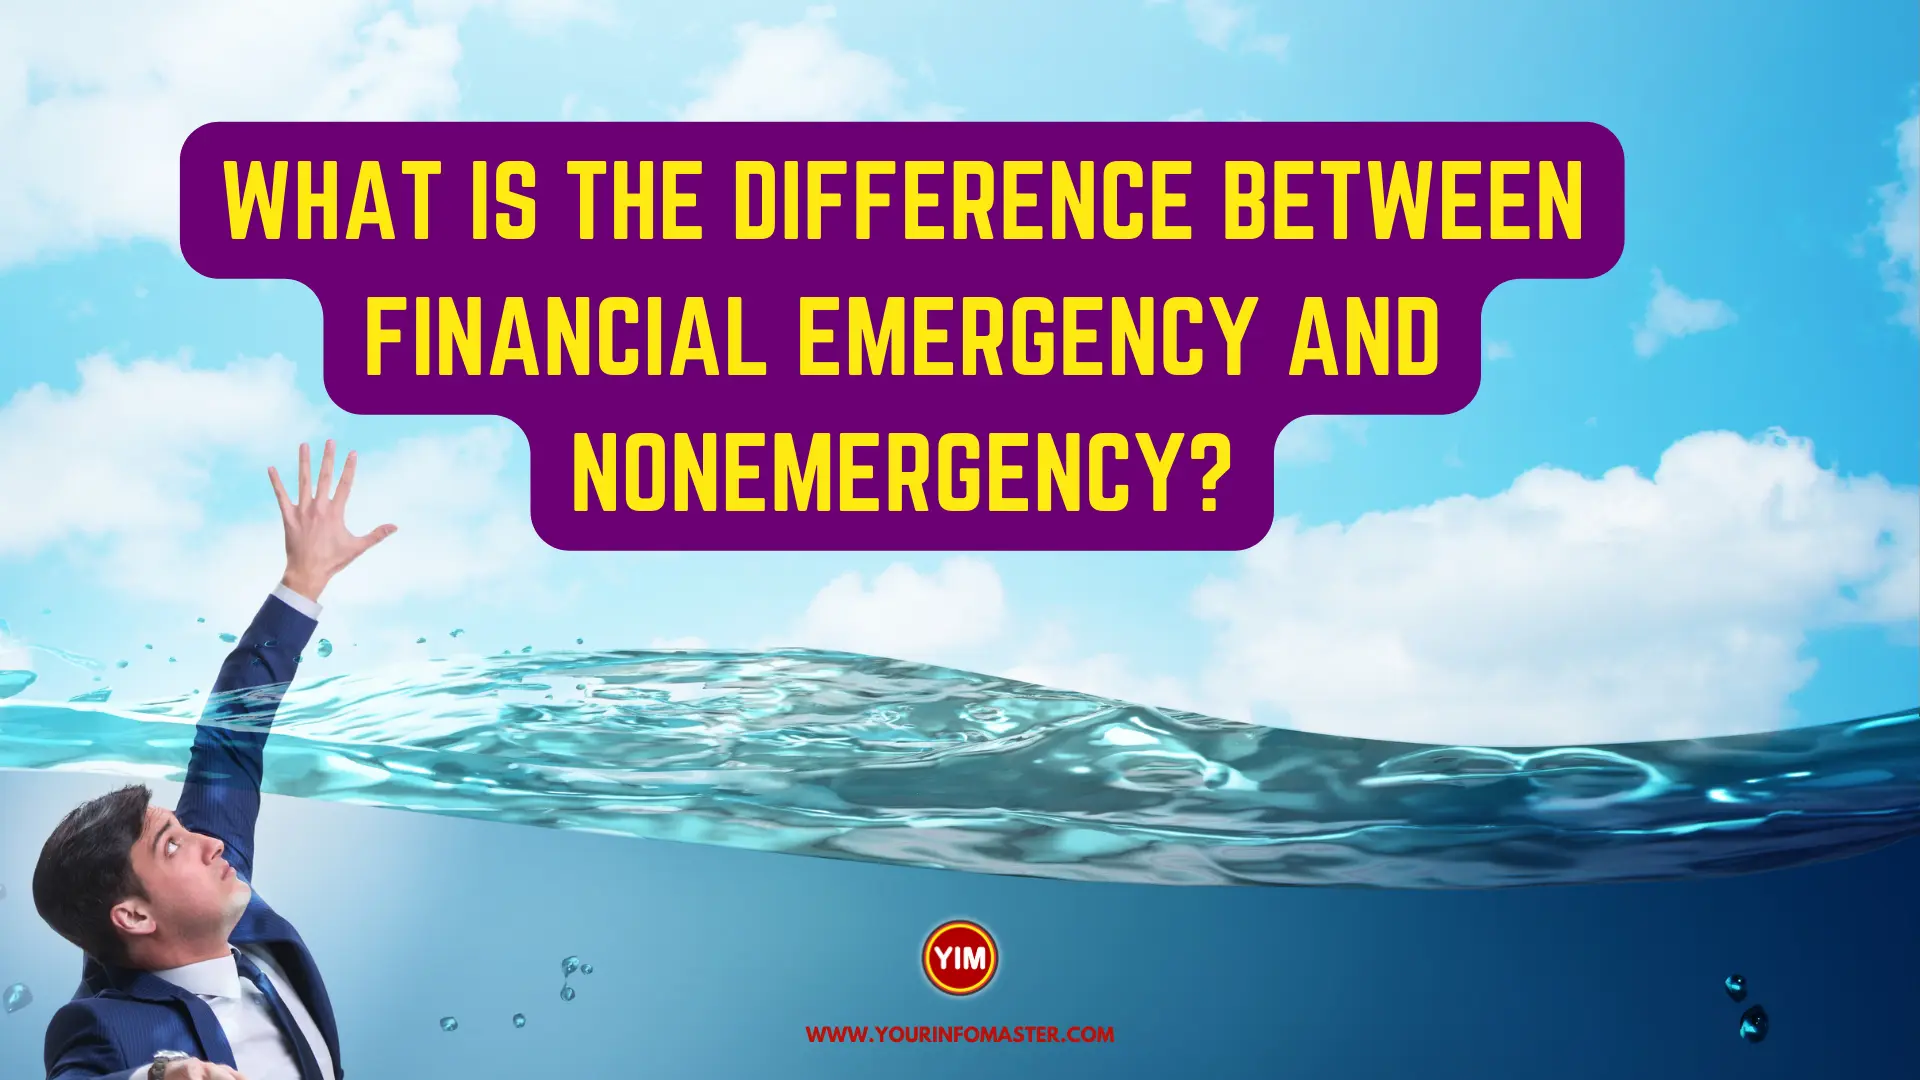 What is the Difference Between Financial Emergency and Nonemergency